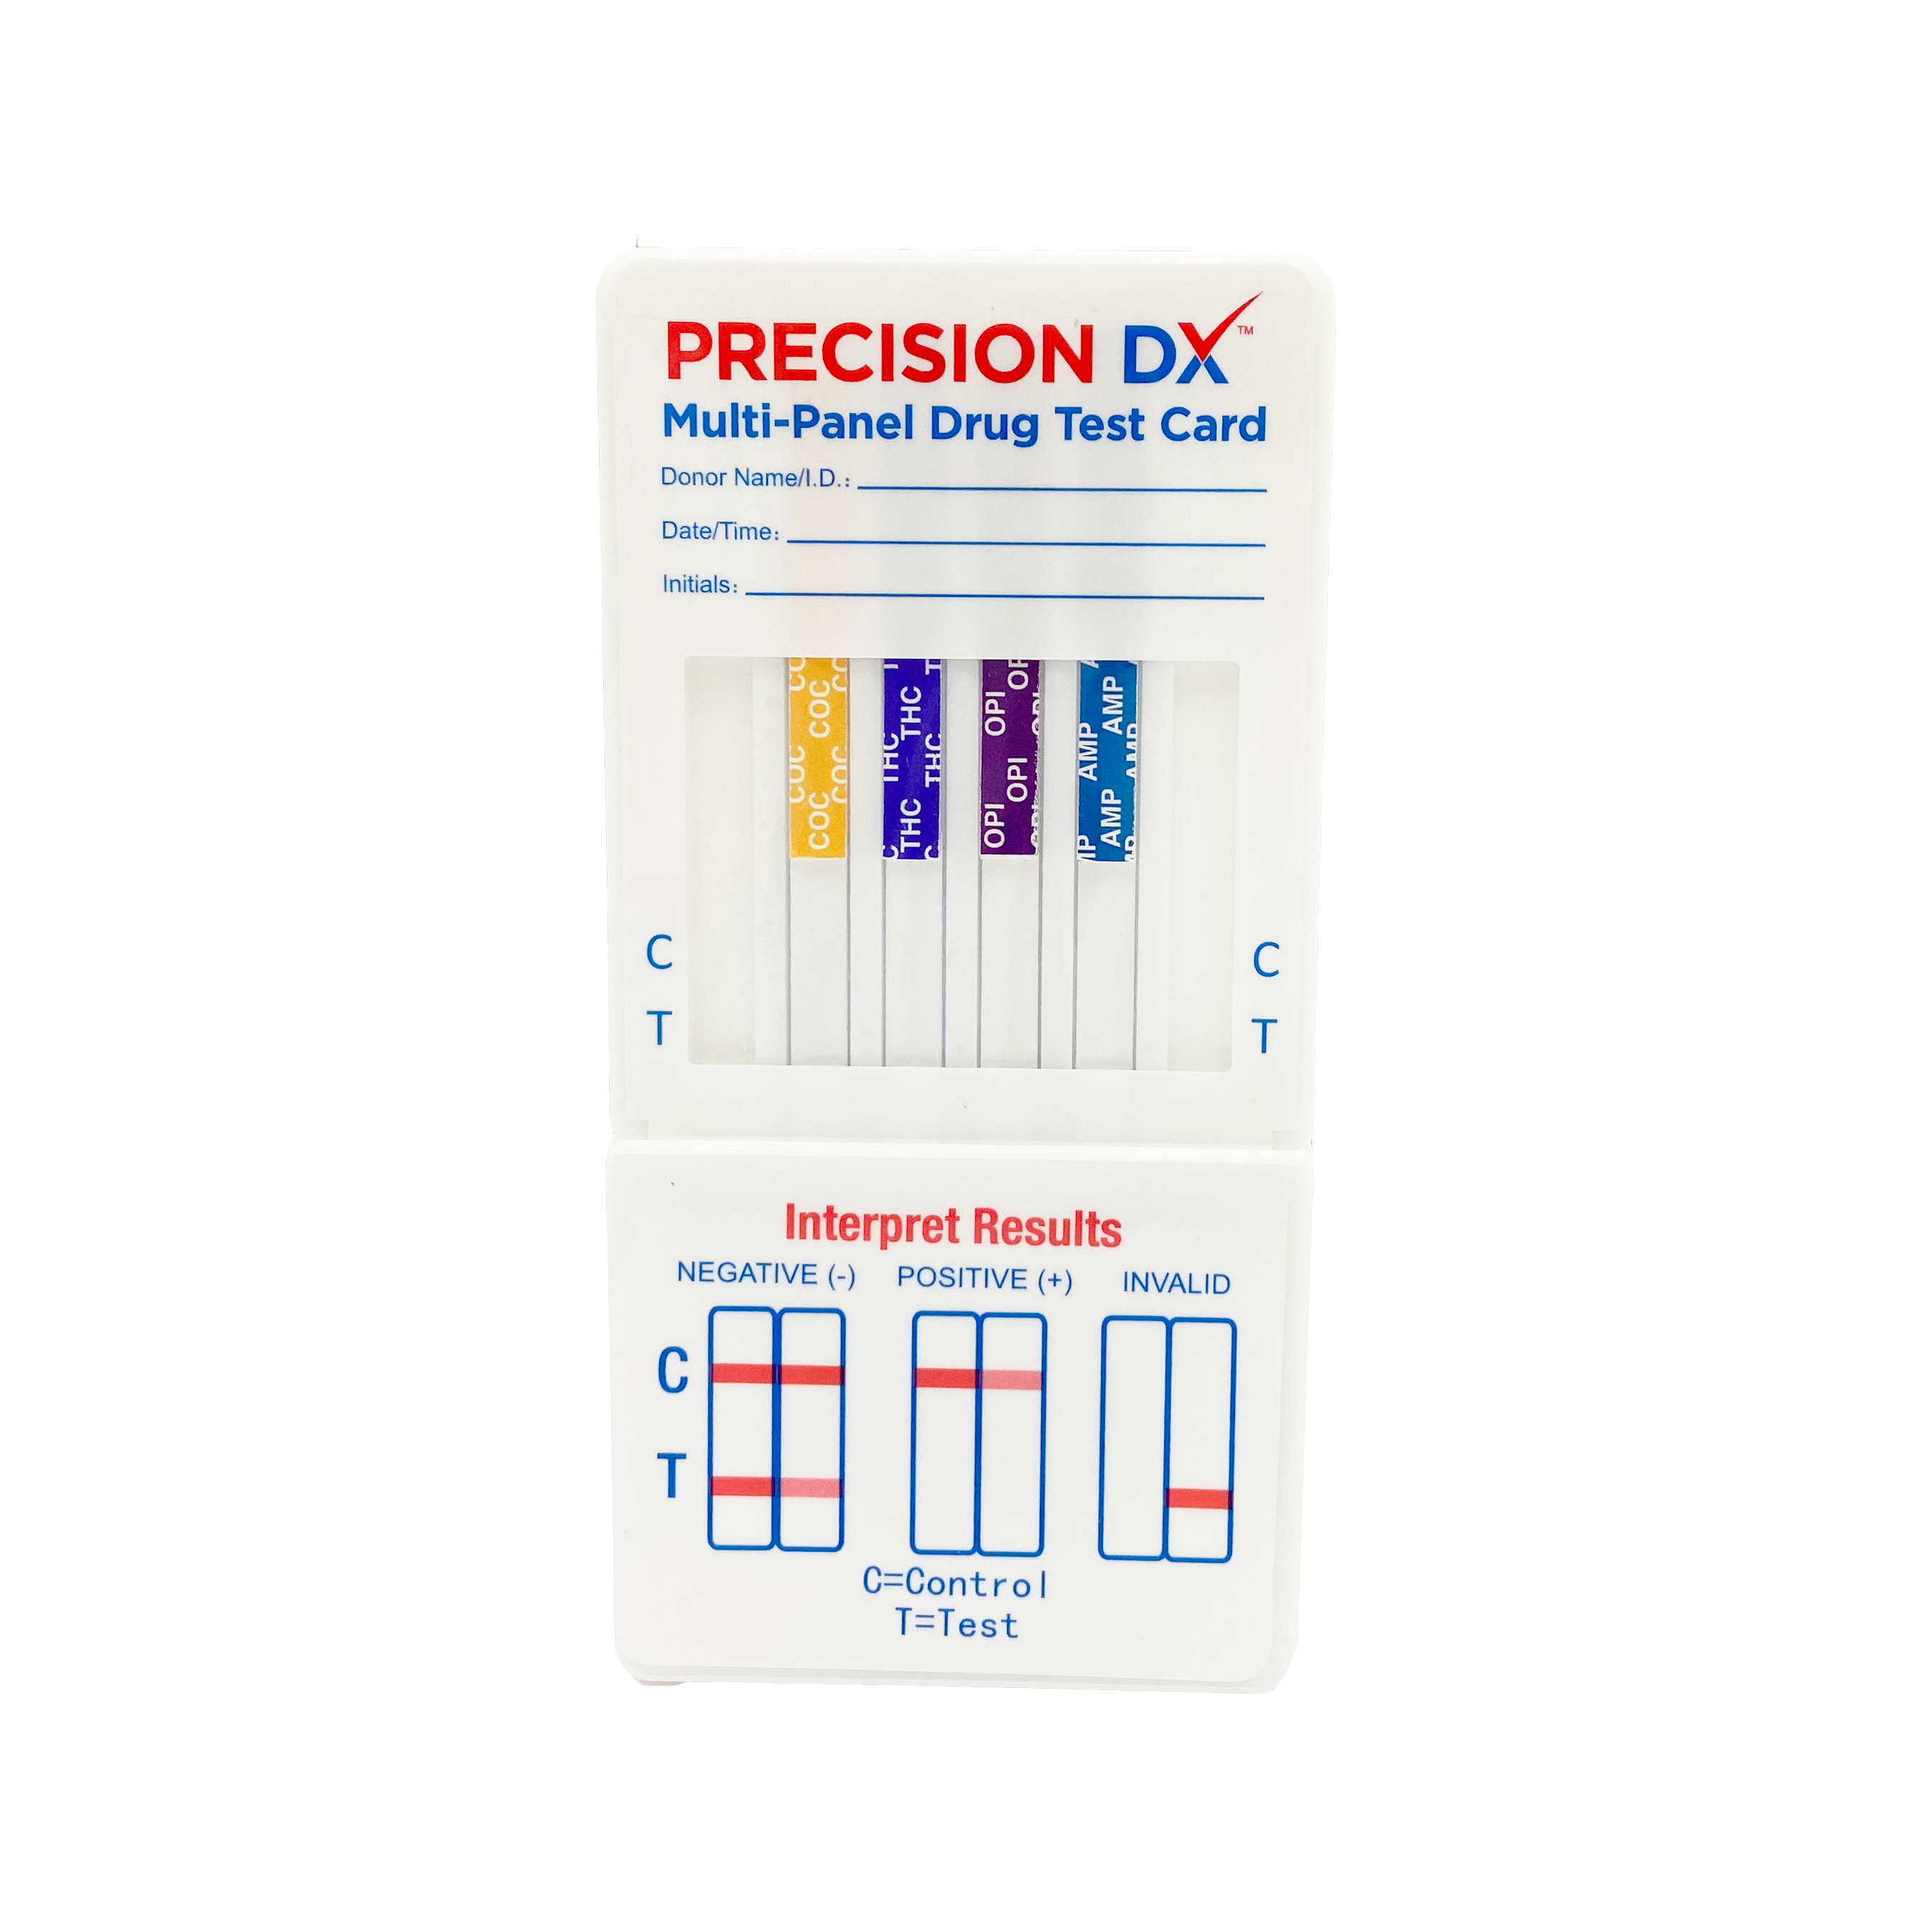 Precision DX - 8 Panel <span style='font-size:11px; color:#7d7d7d;'><br>COC, AMP, MET, THC, MDMA, OPI, OXY, BZO</span>